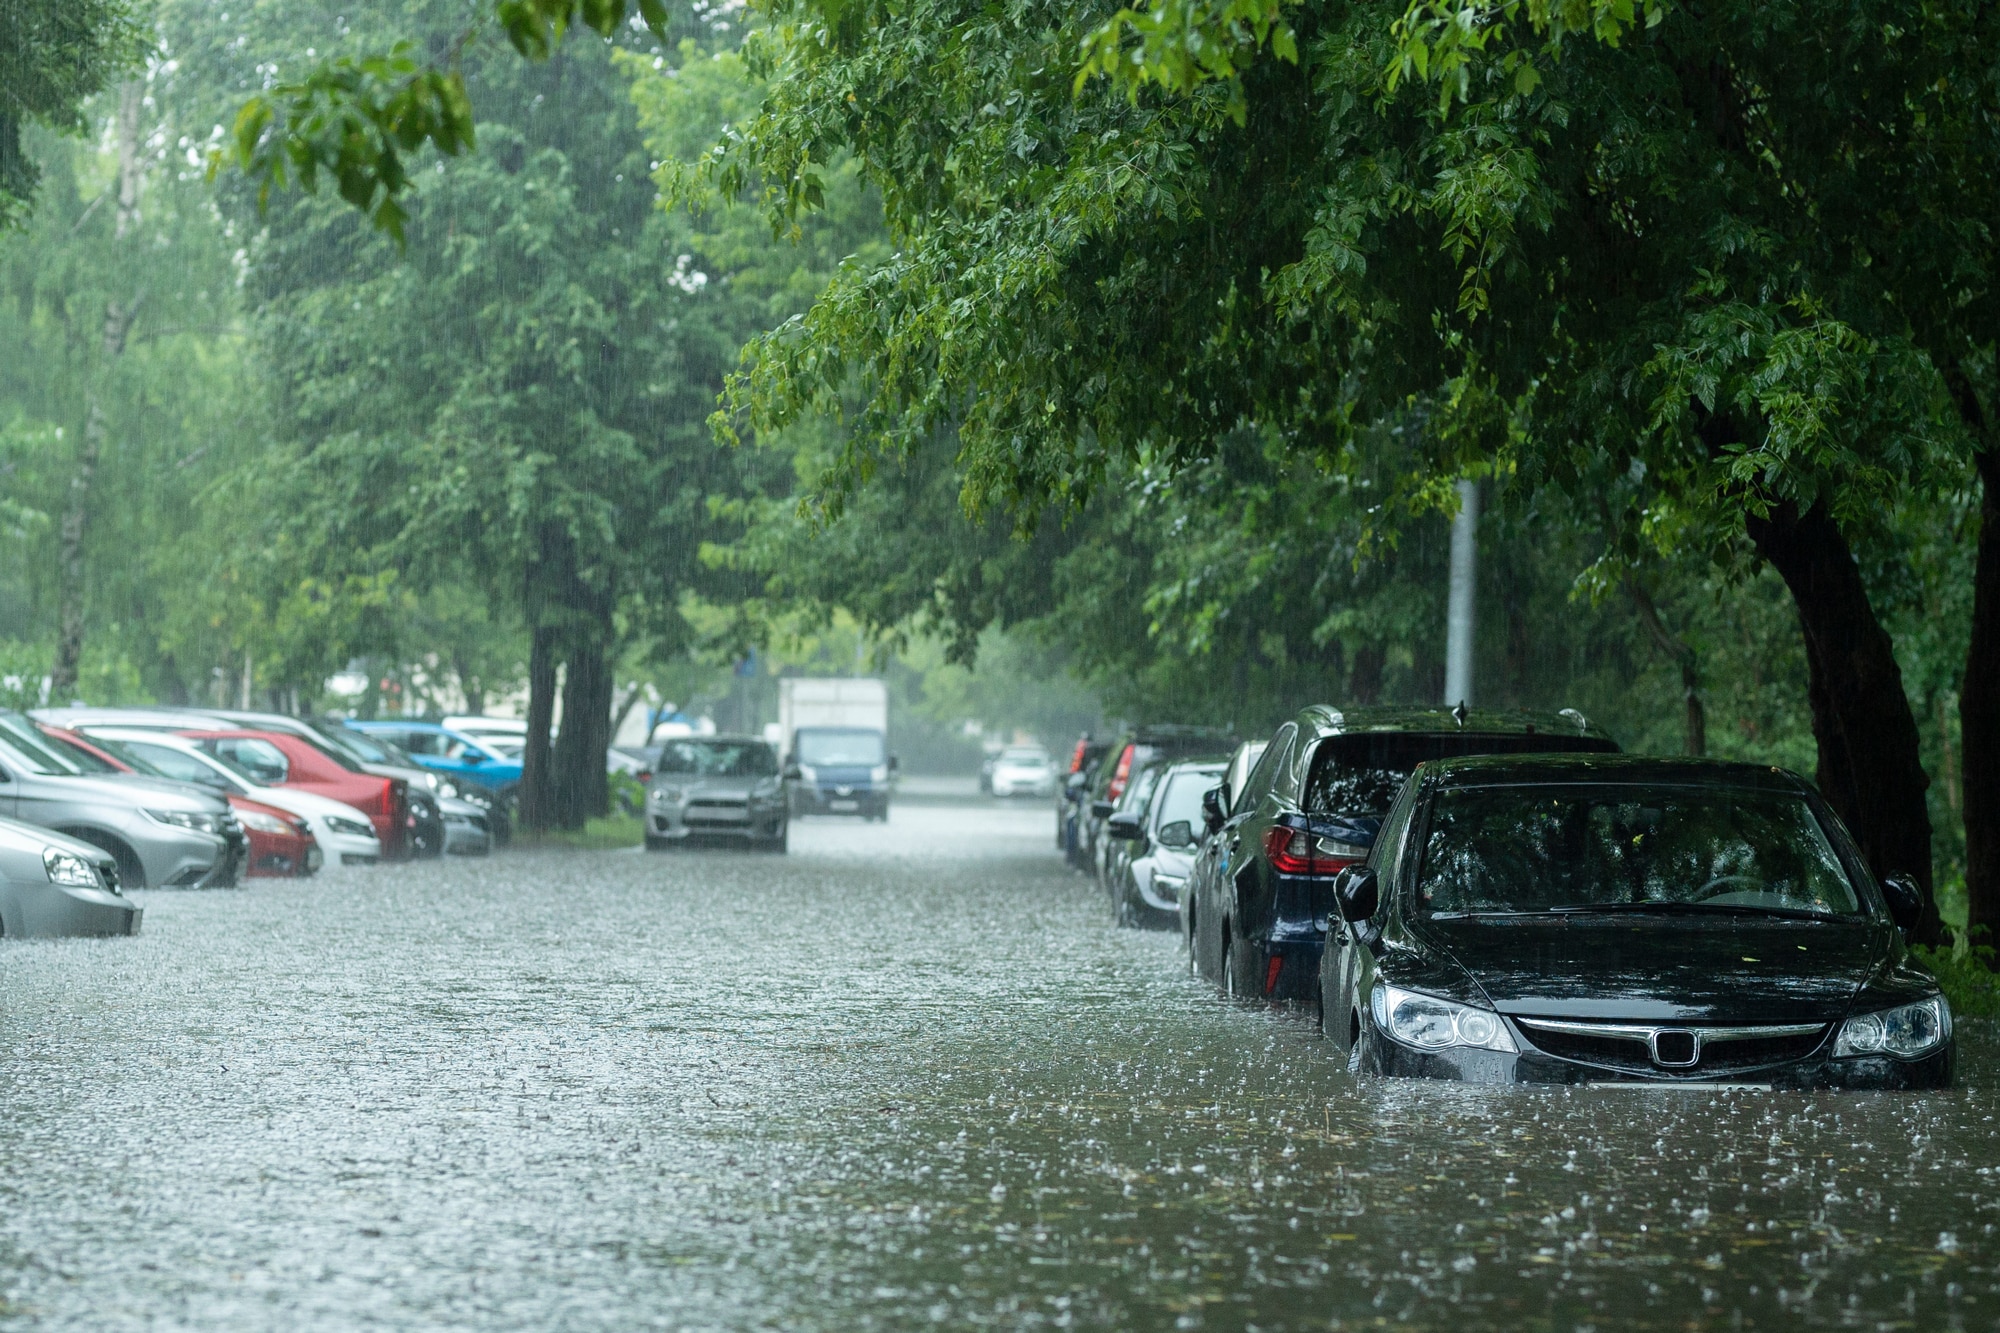 Flooded cars on the street of the city after heavy rain